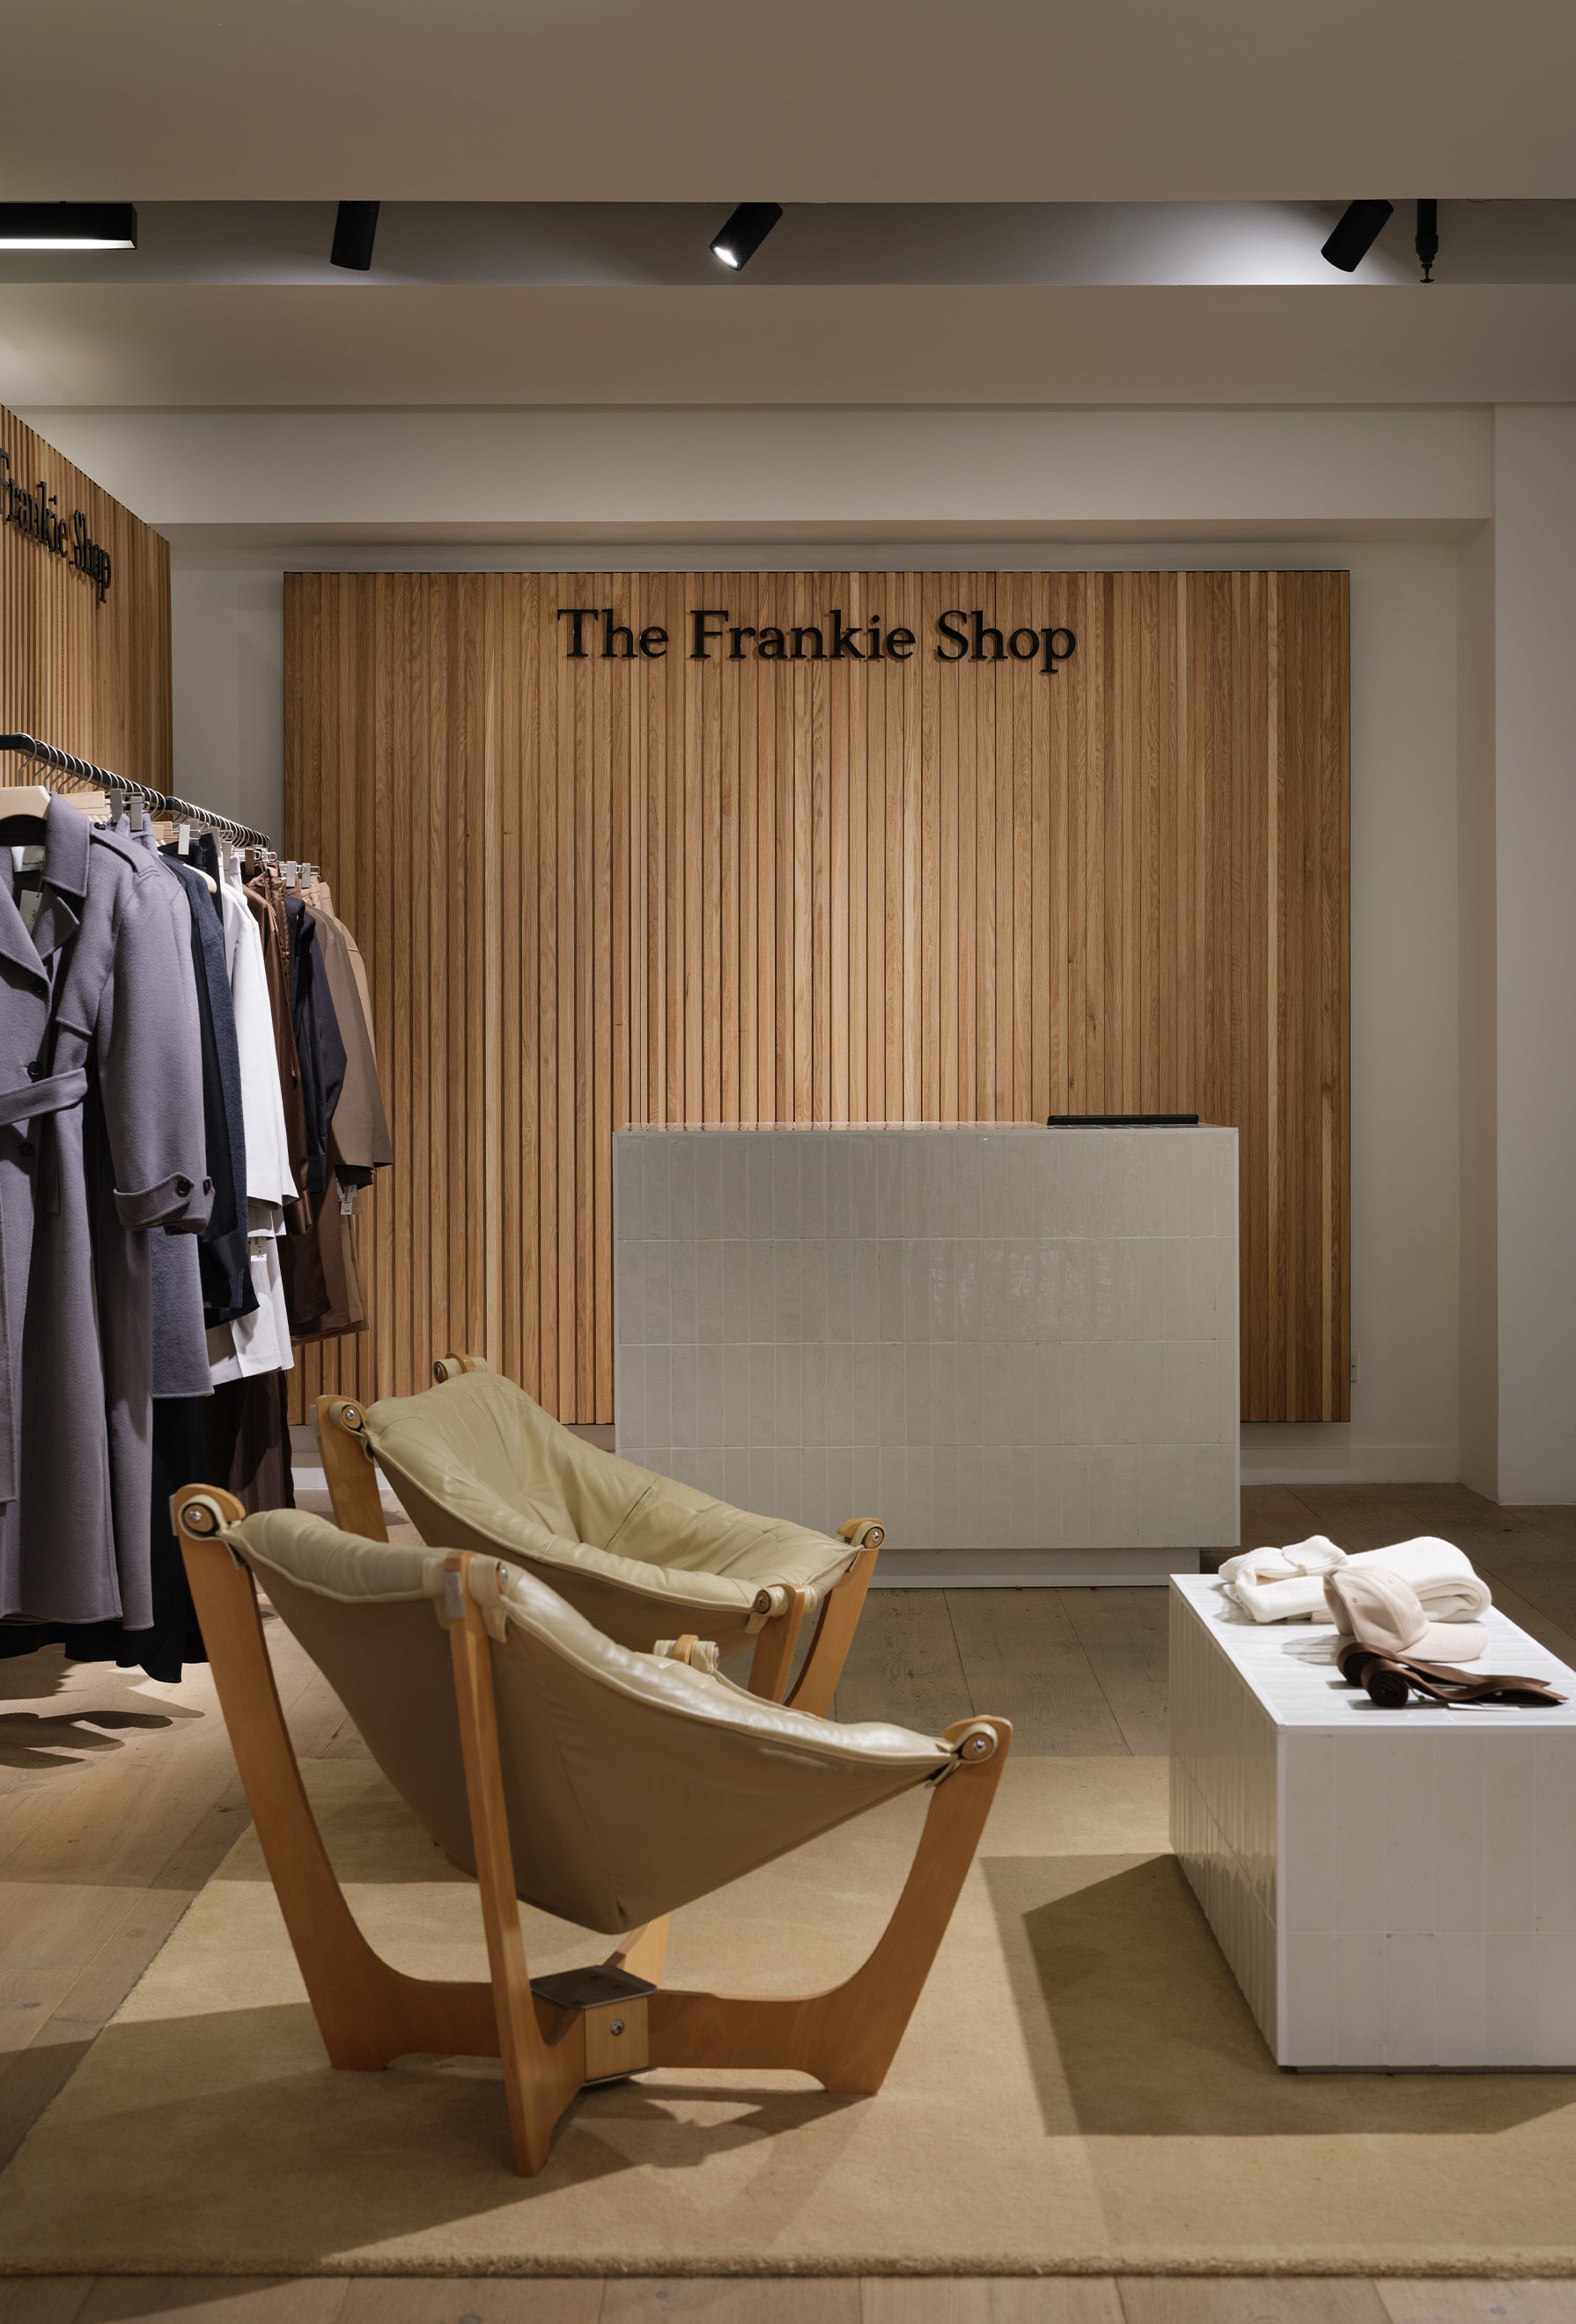 The Frankie Shop in London